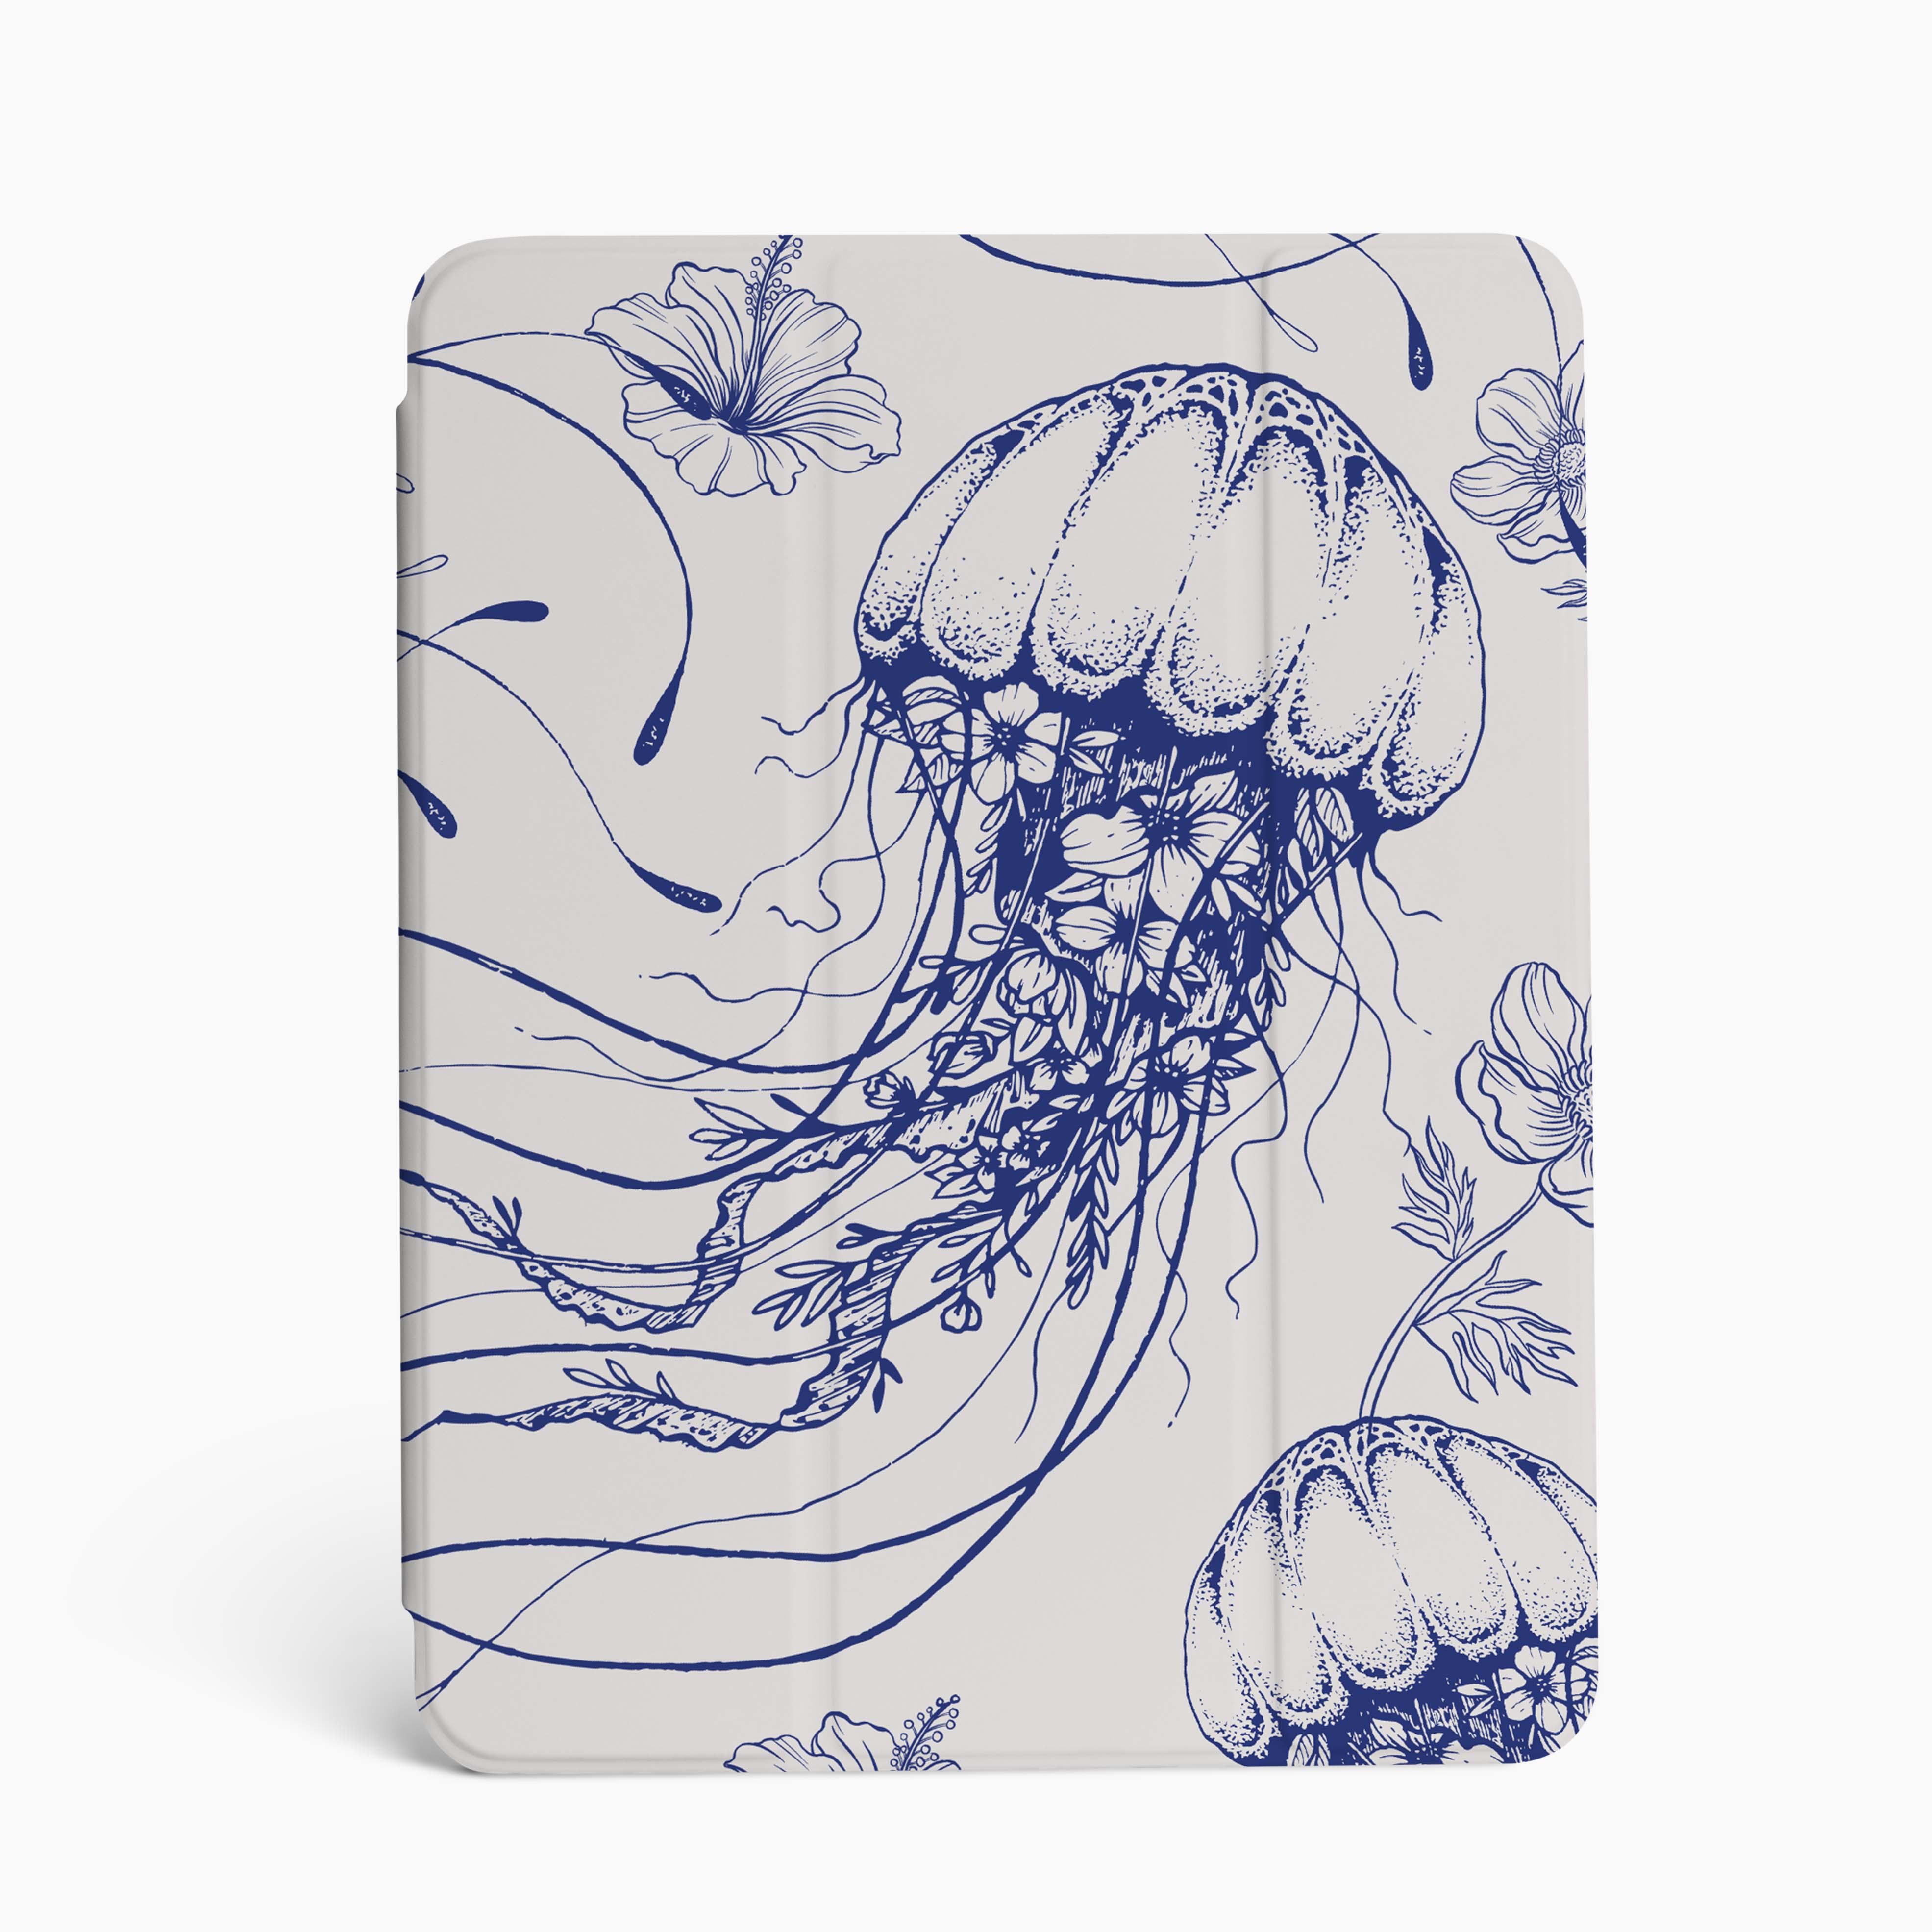 Jellyfish Aesthetic iPad Case with or without Pencil Holder